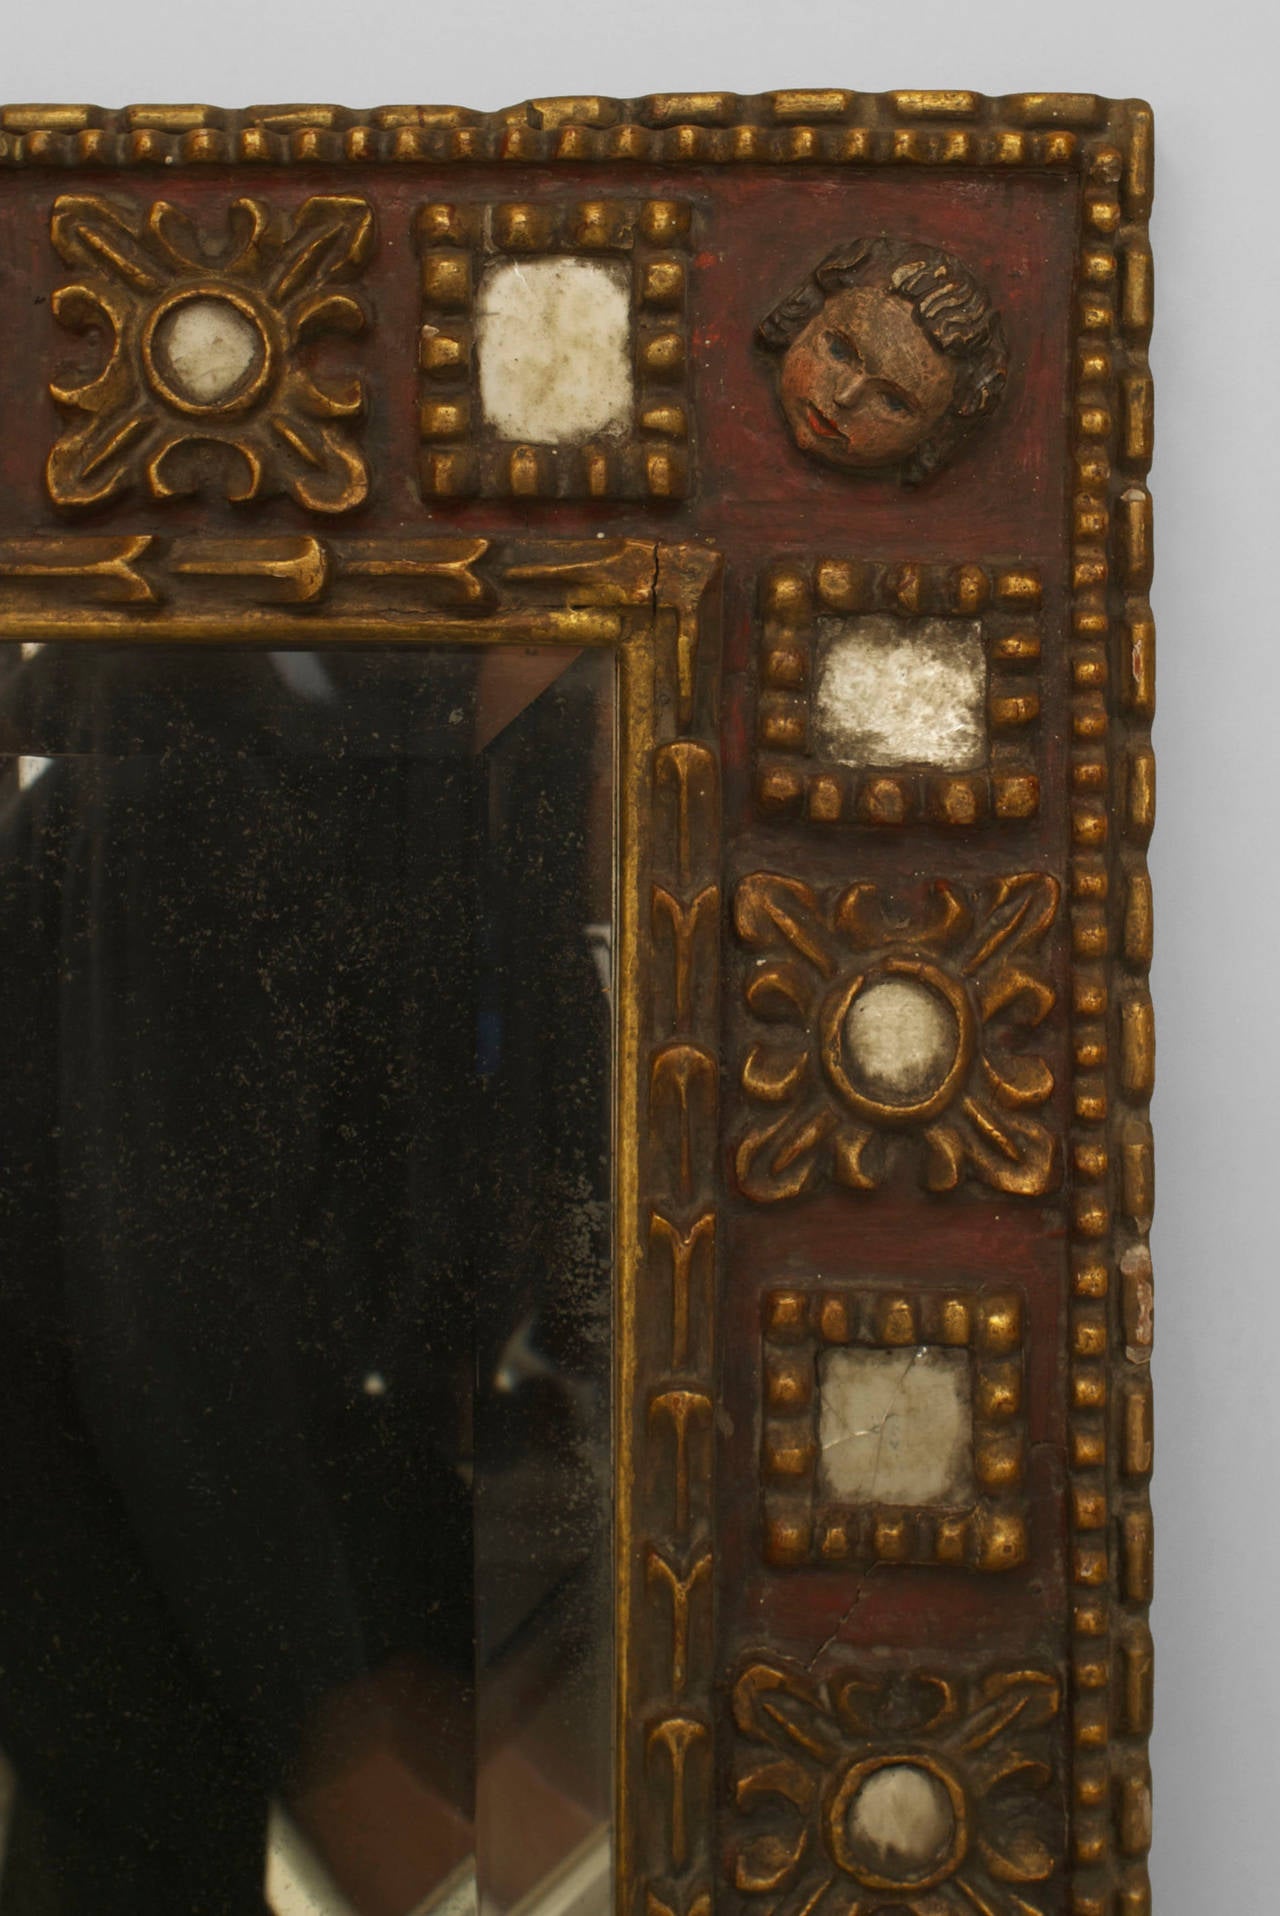 19th century Spanish Renaissance style wall mirror of probable Mexican origin. The mirror features a gilt carved frame with corner masks and inset glass panels.